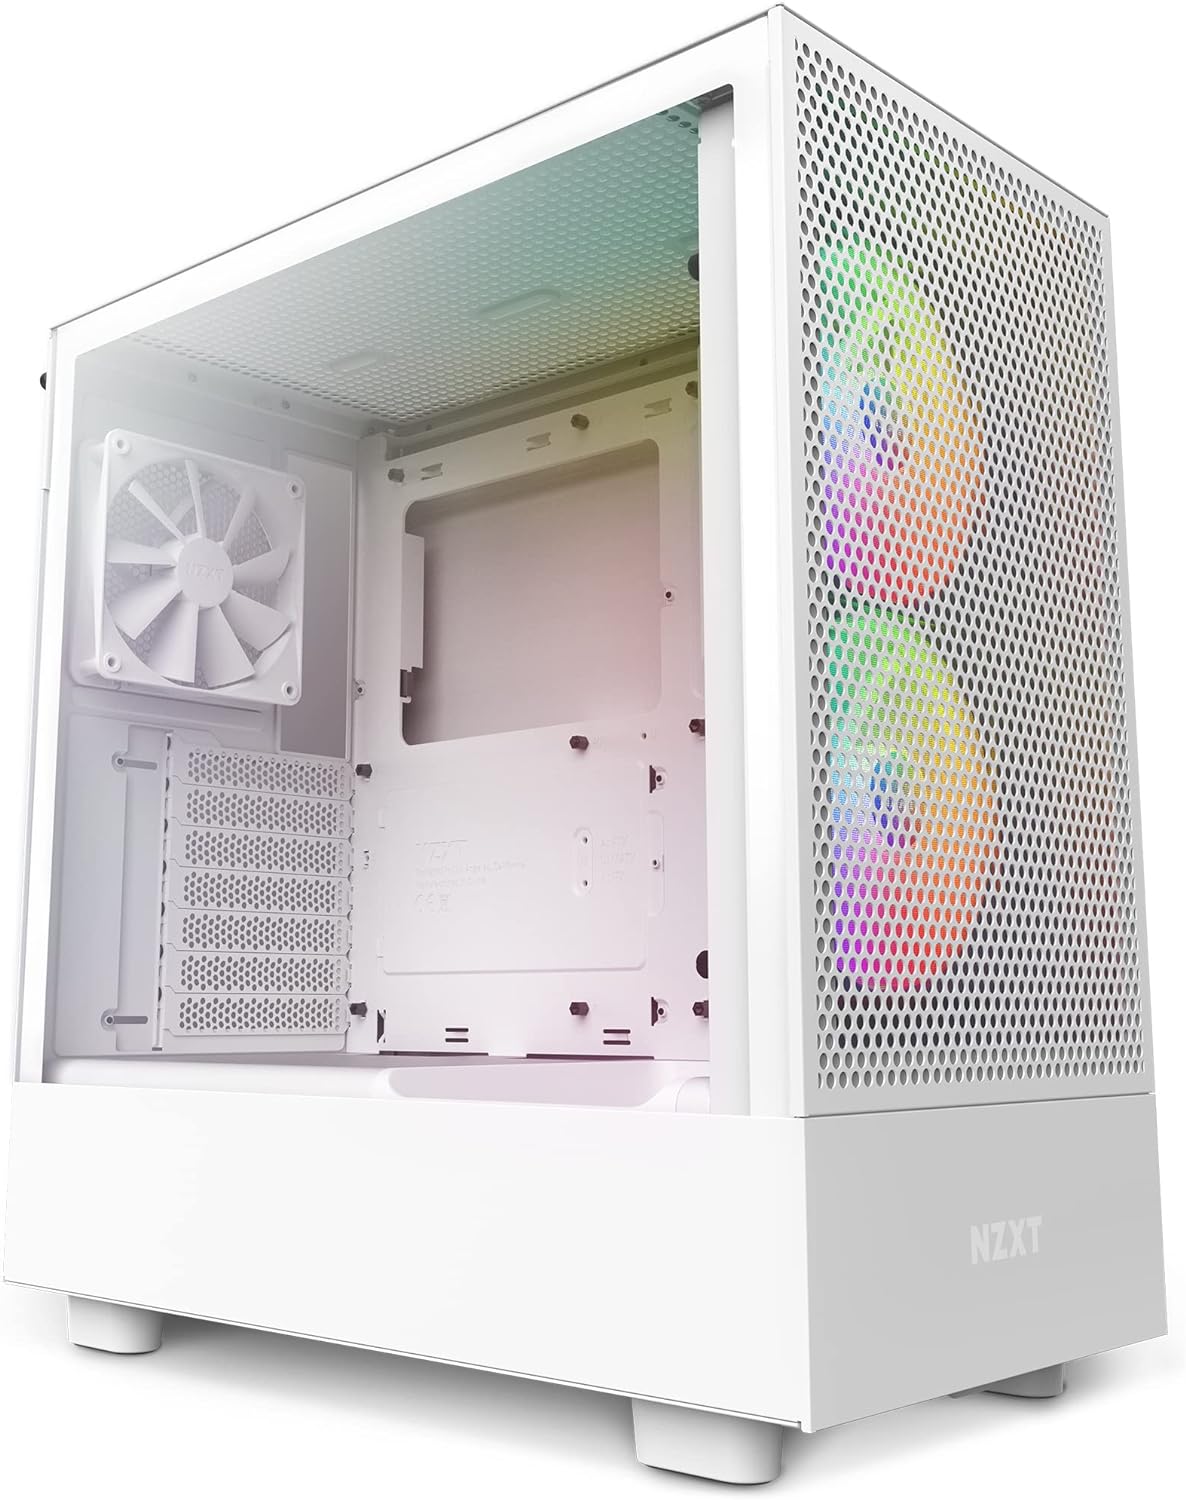 NZXT H5 Flow RGB Compact ATX Mid-Tower PC Gaming Case – High Airflow Perforated Front Panel Tempered Glass Side Cable Management 2 x F140 Core Fans 280mm Radiator Support White